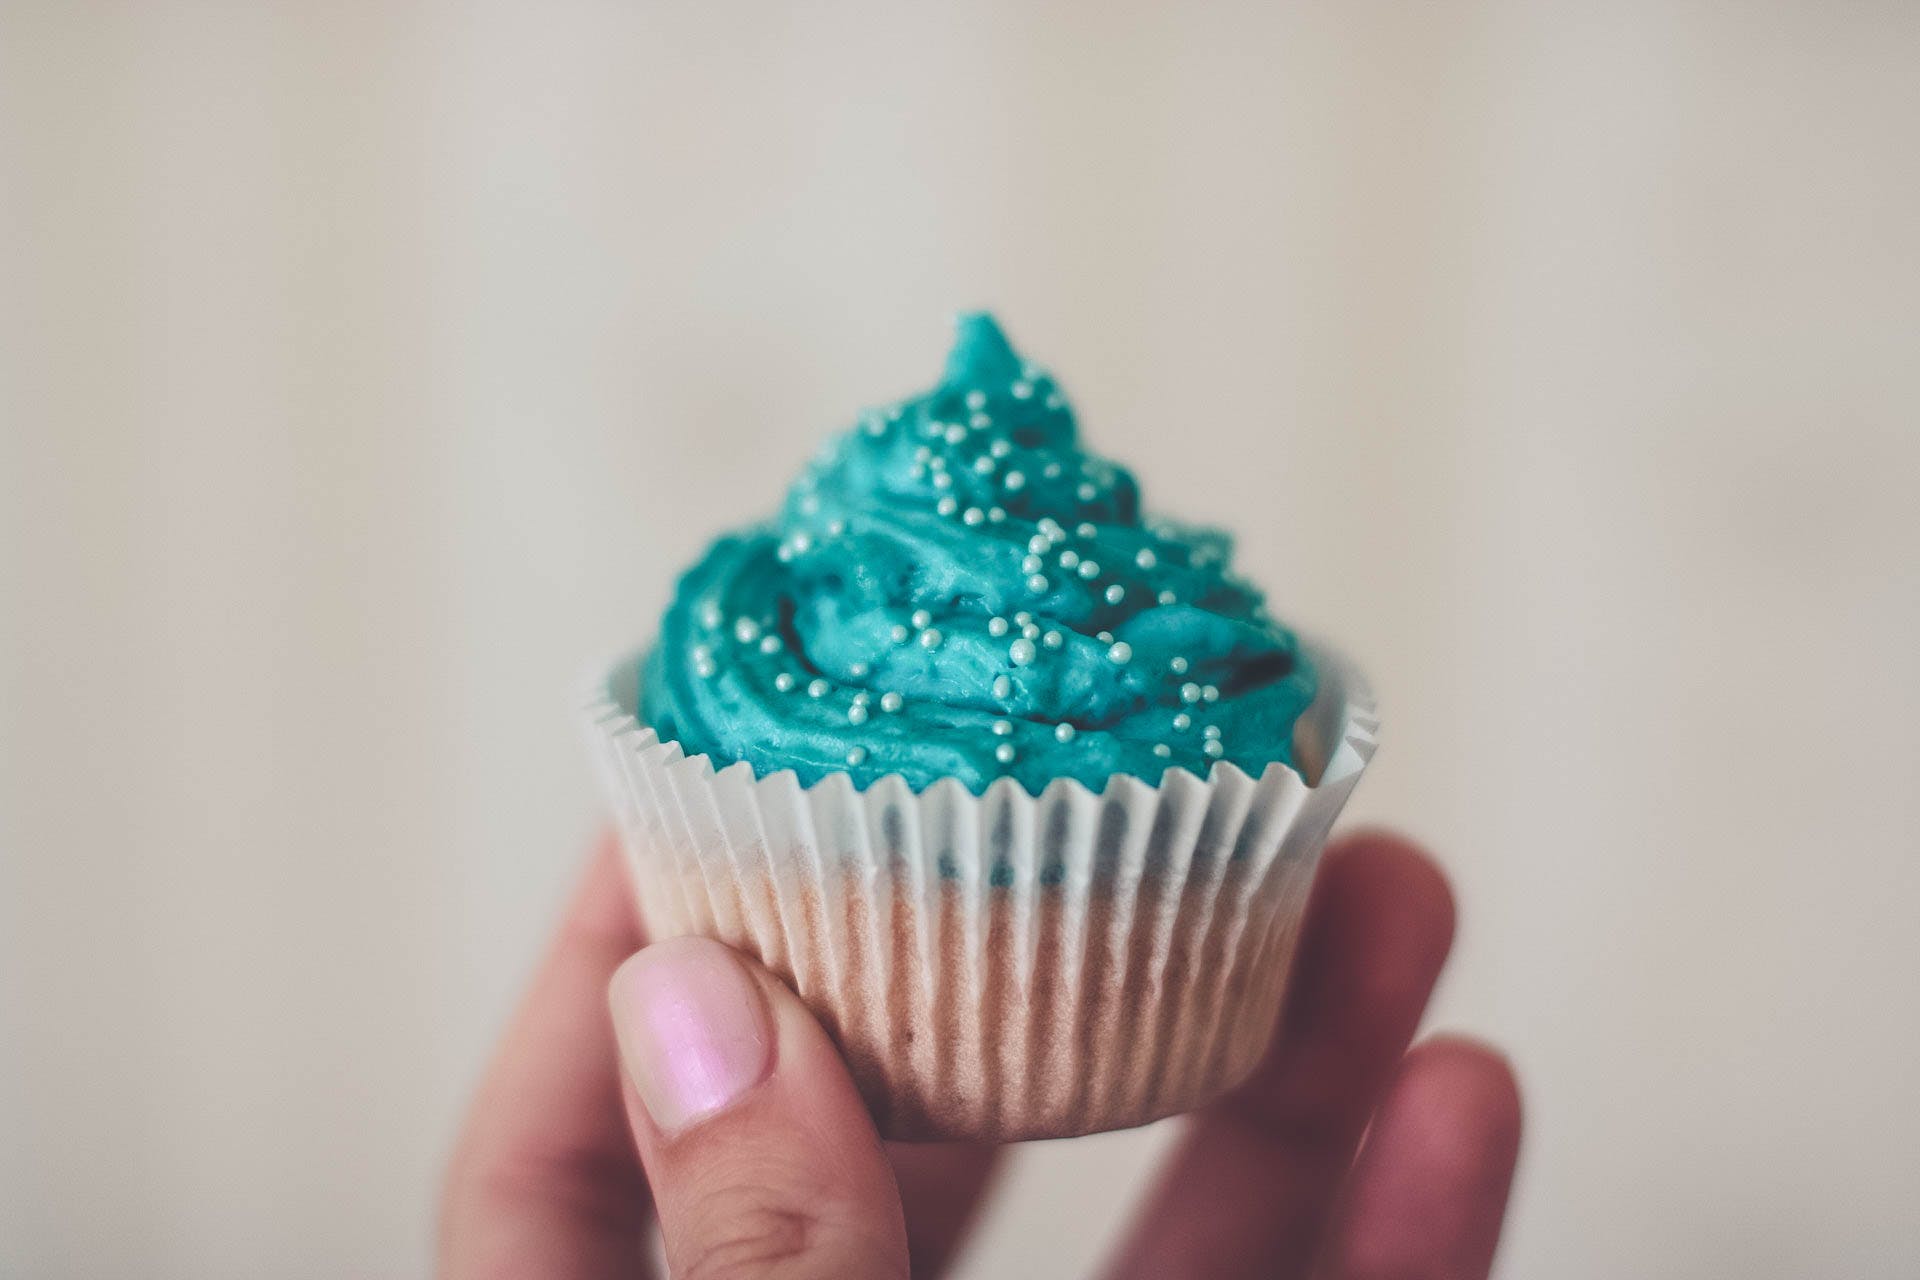 Vanilla cupcake with teal frosting